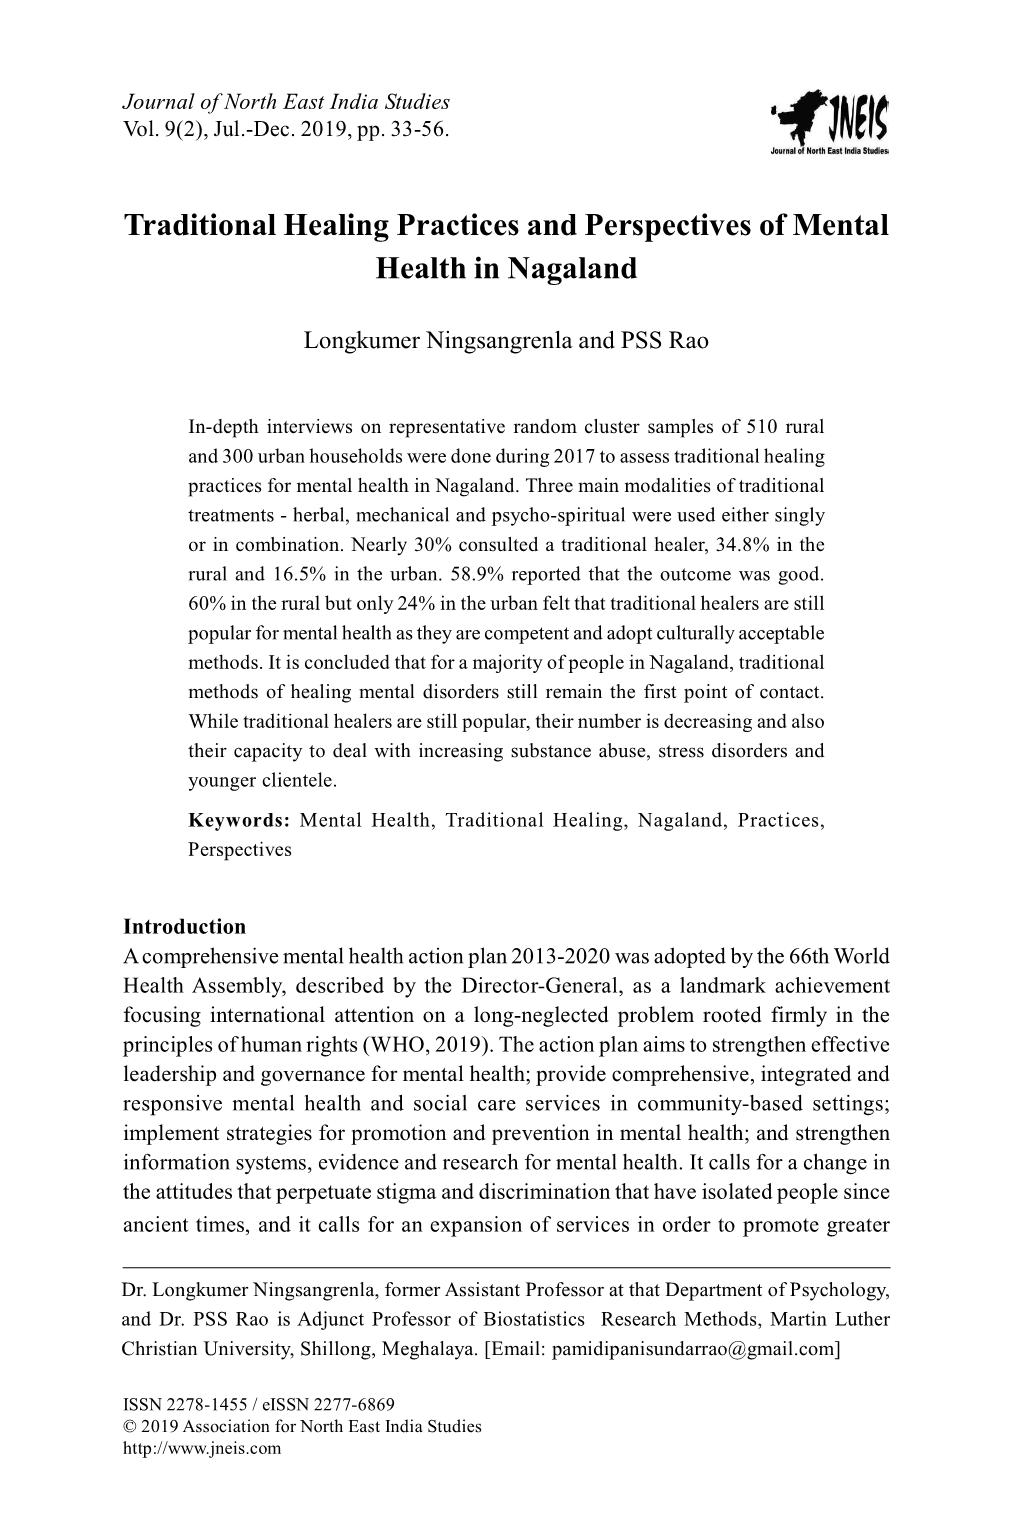 Traditional Healing Practices and Perspectives of Mental Health in Nagaland